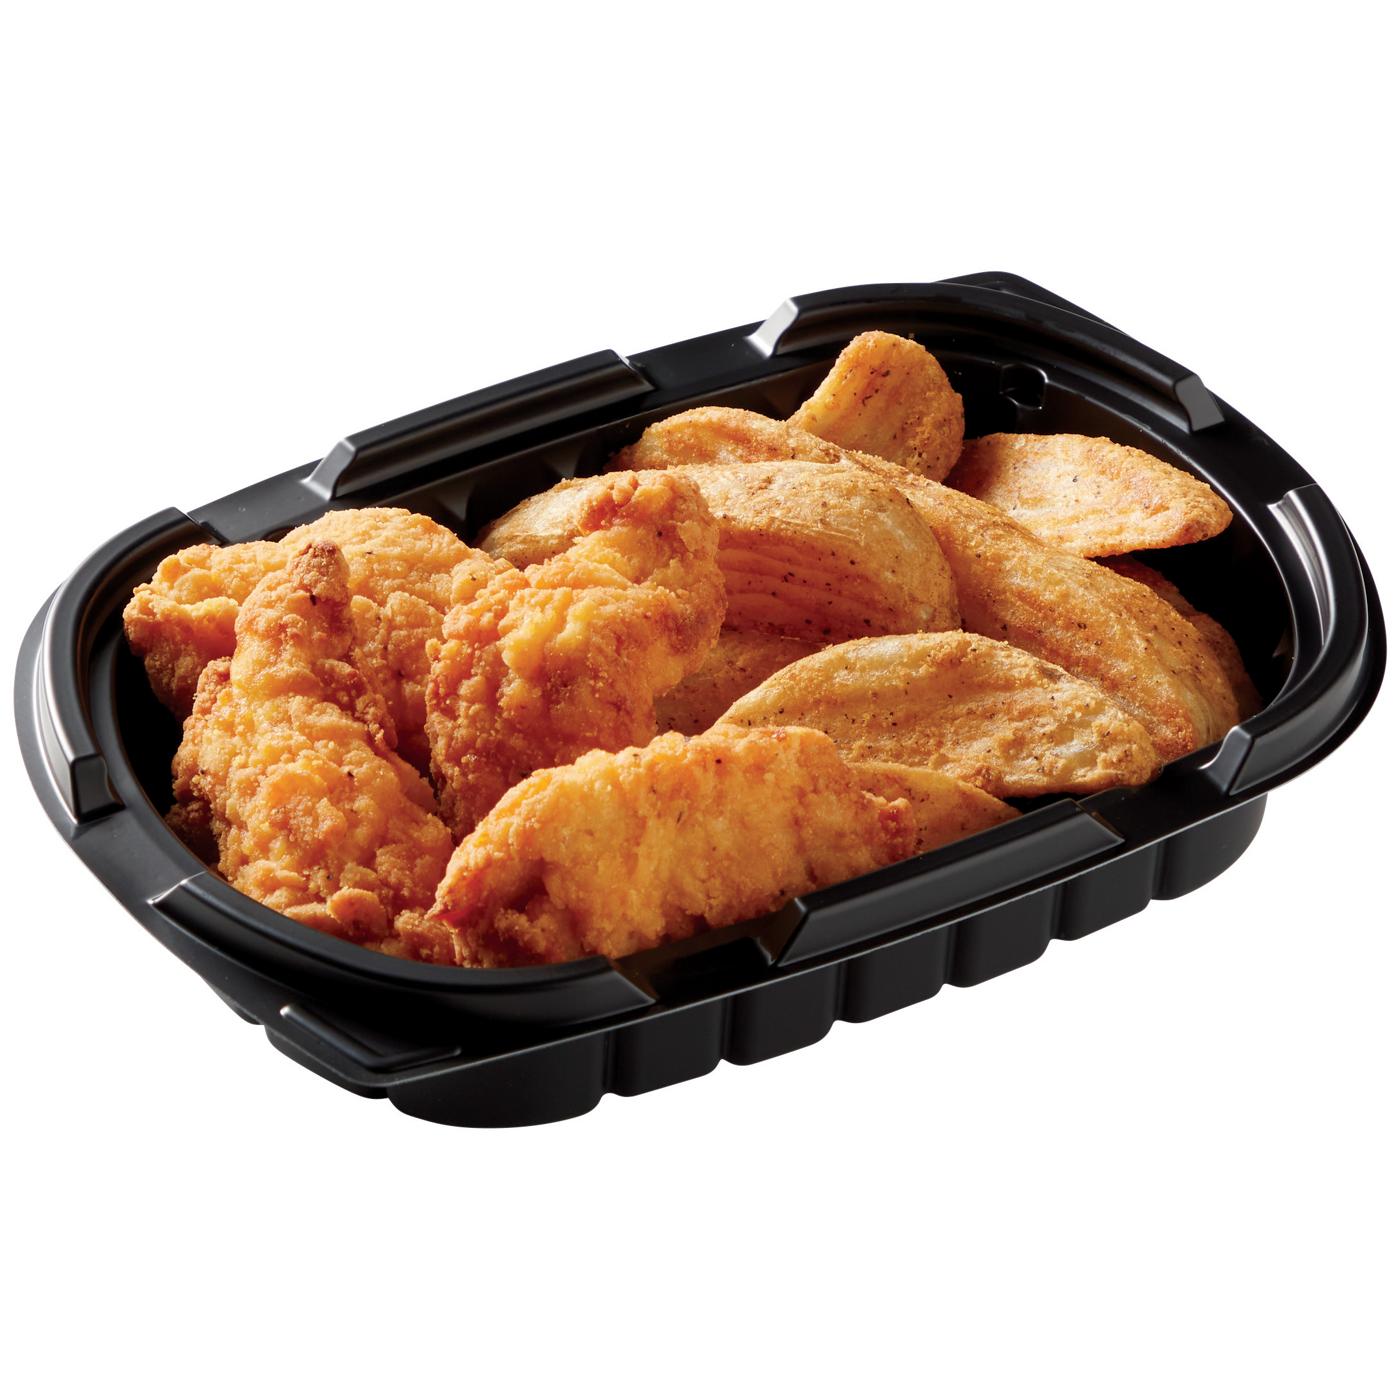 Meal Simple by H-E-B Chicken Tenders & Fries (Sold Hot); image 1 of 2